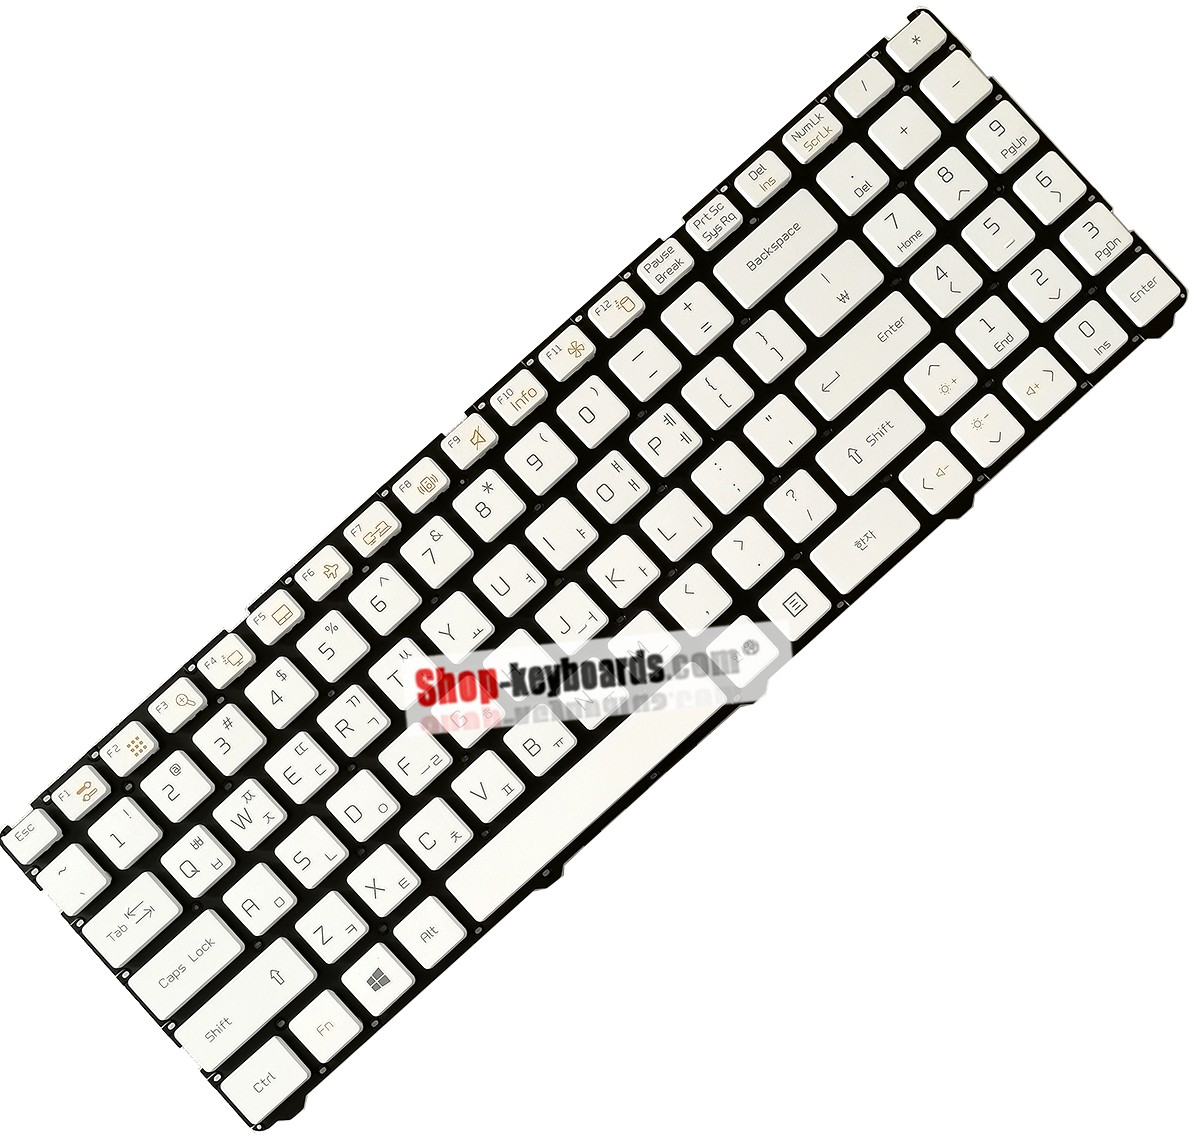 LG MP-12K73DO-9207 Keyboard replacement